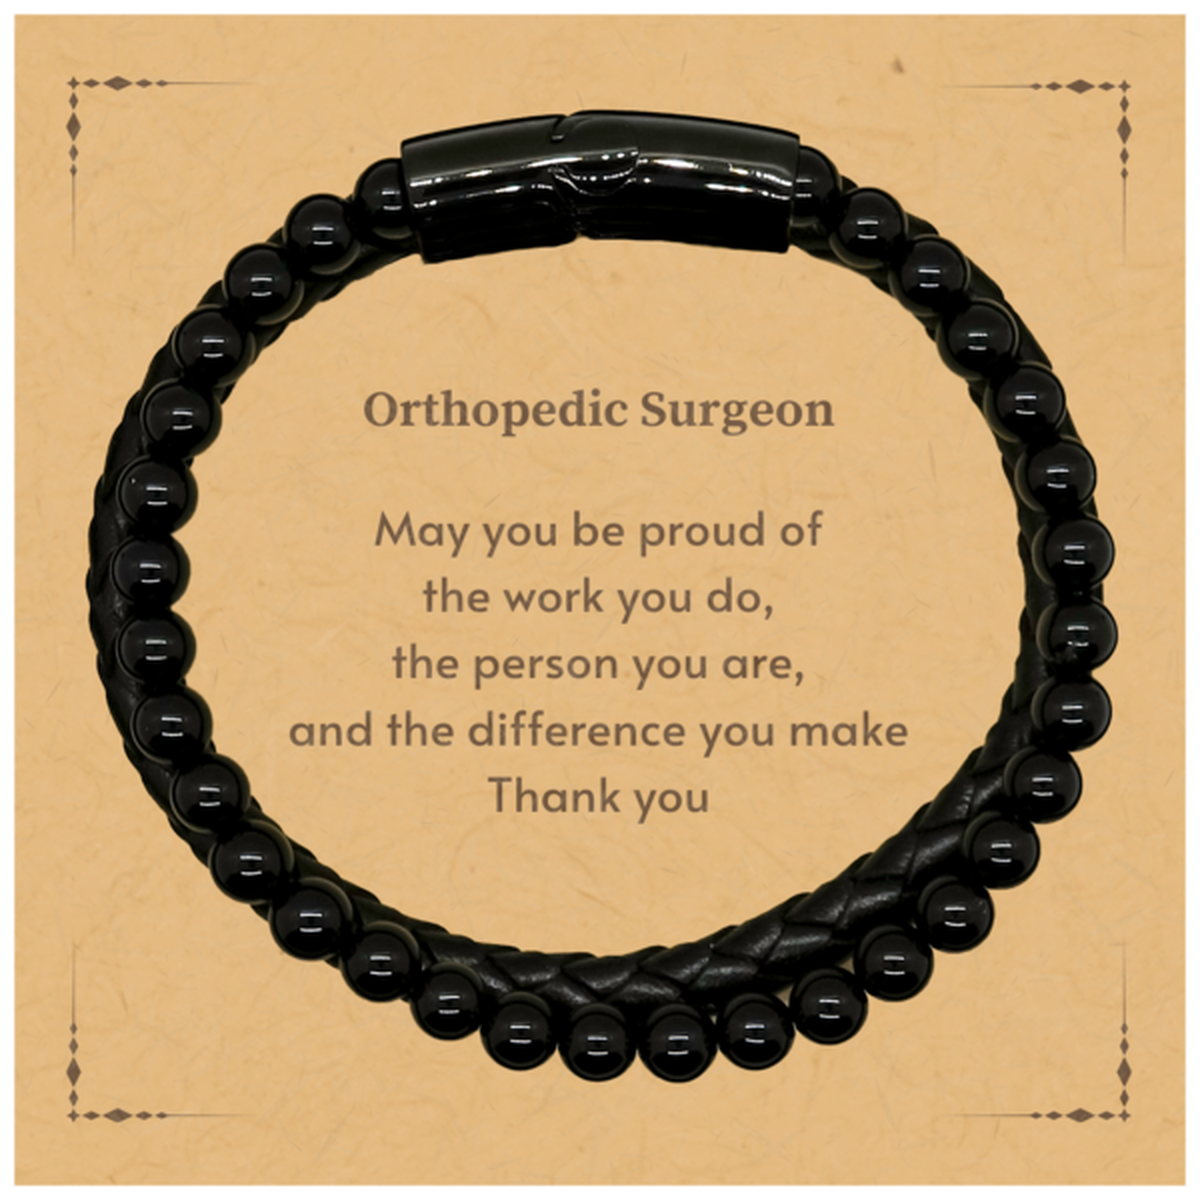 Heartwarming Stone Leather Bracelets Retirement Coworkers Gifts for Orthopedic Surgeon, Orthopedic Surgeon May You be proud of the work you do, the person you are Gifts for Boss Men Women Friends